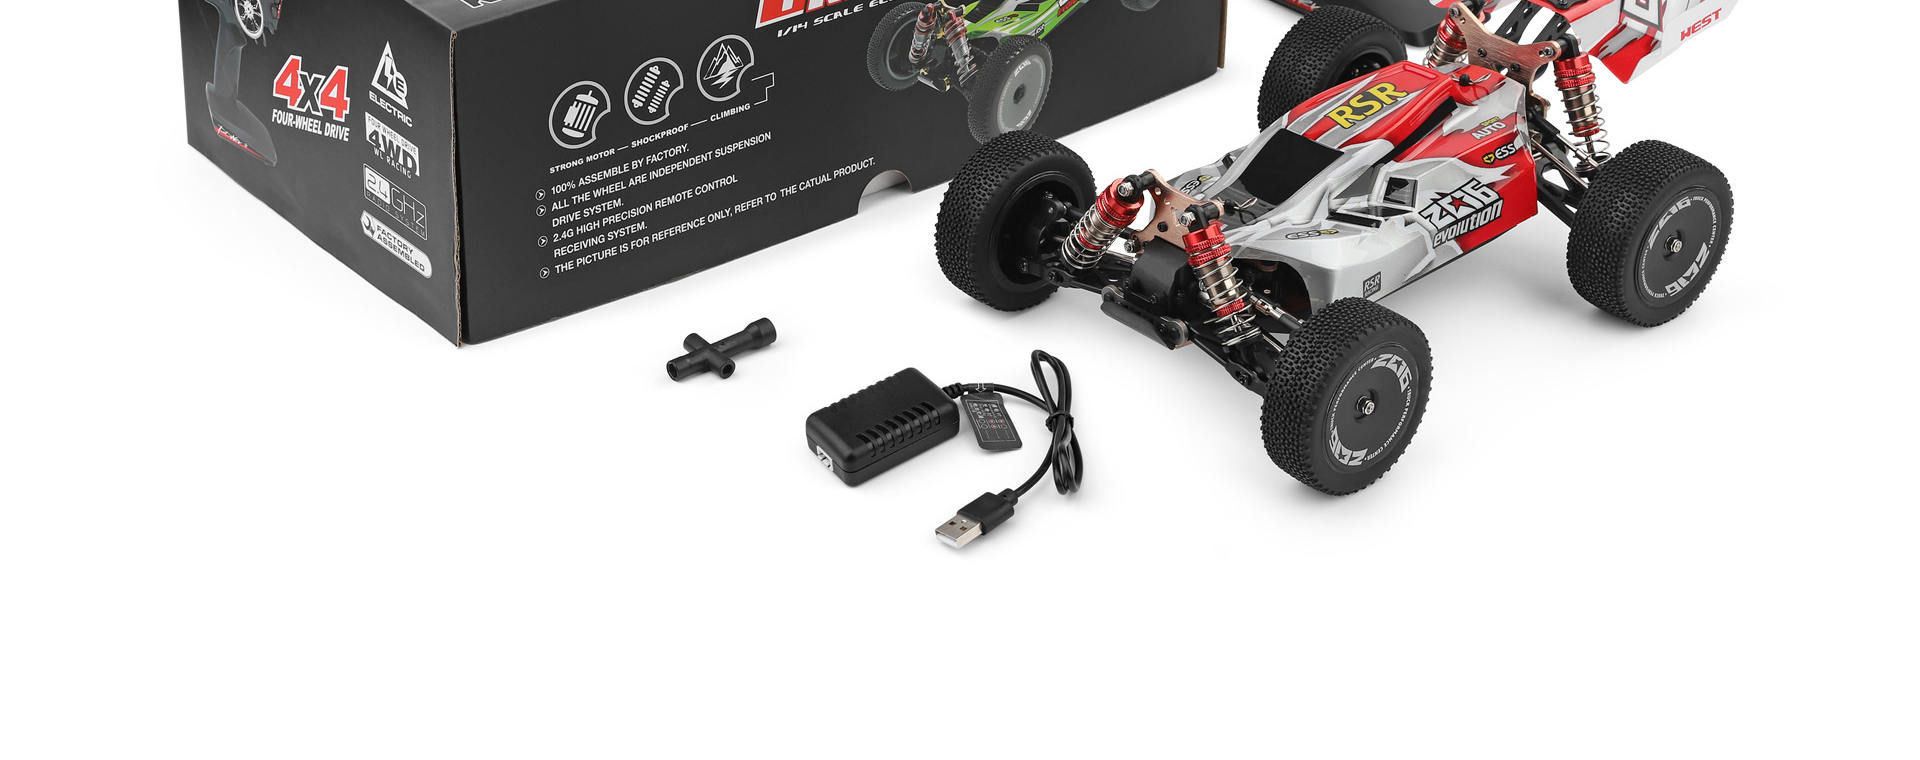 Wltoys Xks 144001 Rc Car 60km/h High Speed 1/14 2.4ghz Rc Buggy 4wd Racing  Off-road Drift Car Rtr Remote Control Toy - Rc Cars - AliExpress